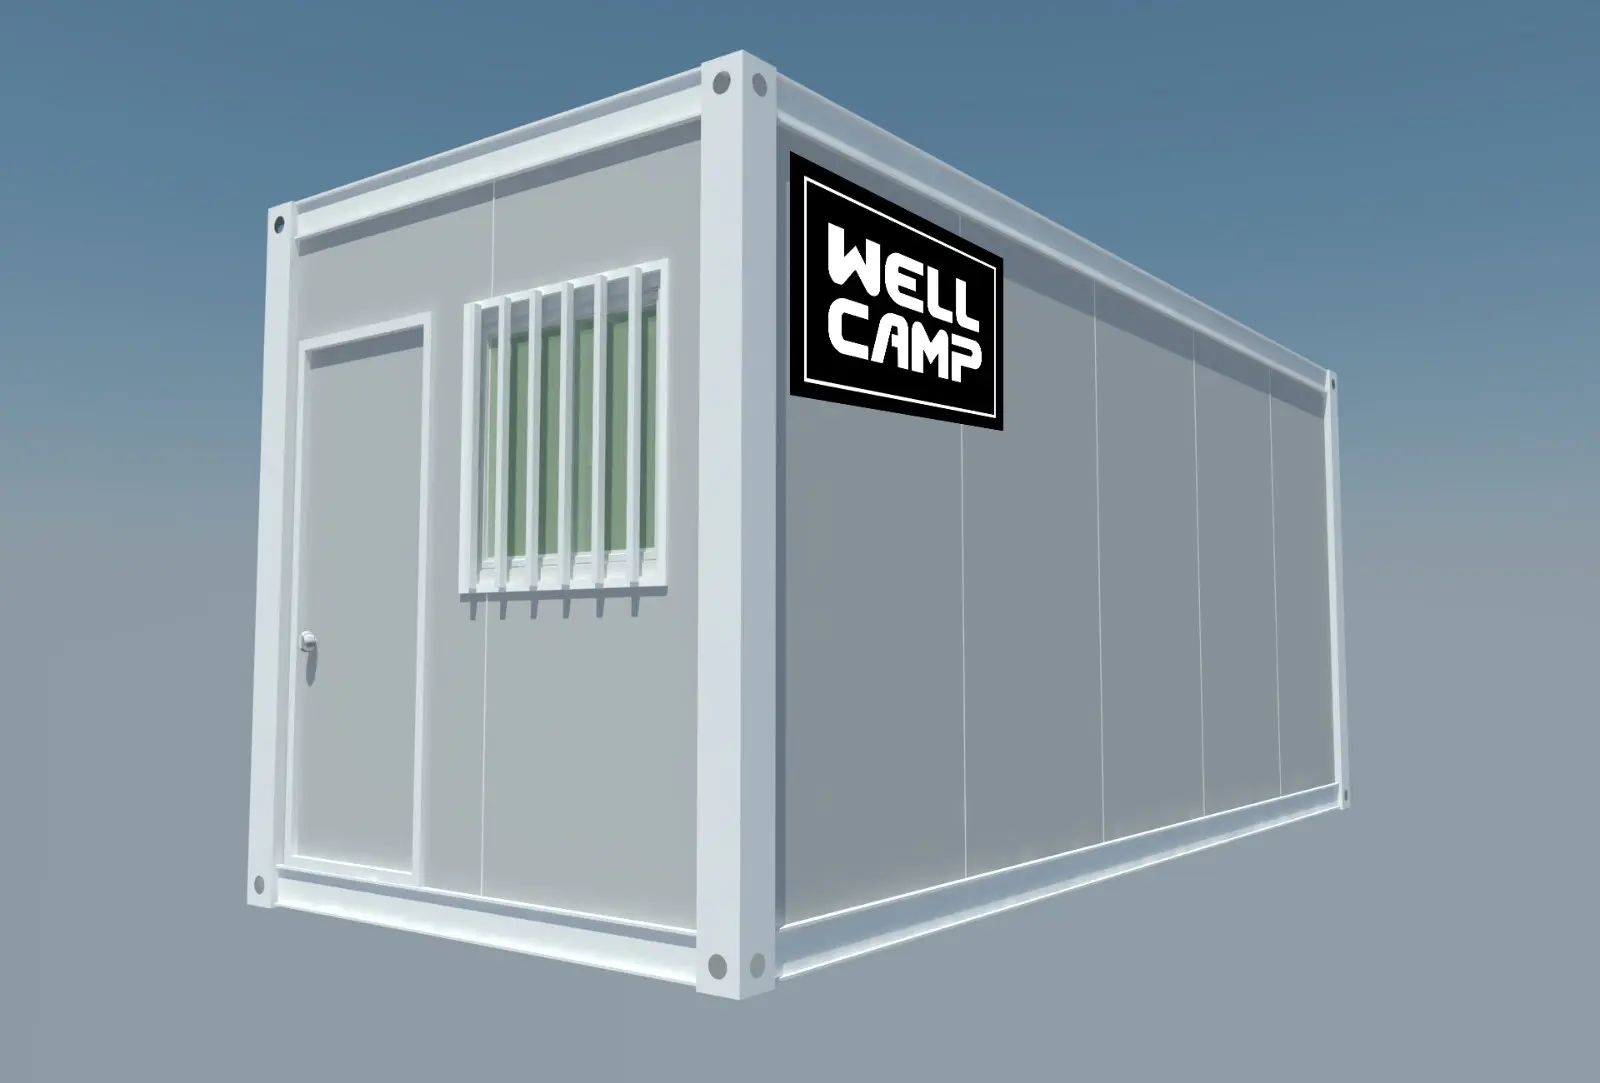 pack fireproof flat pack containers galss house WELLCAMP company